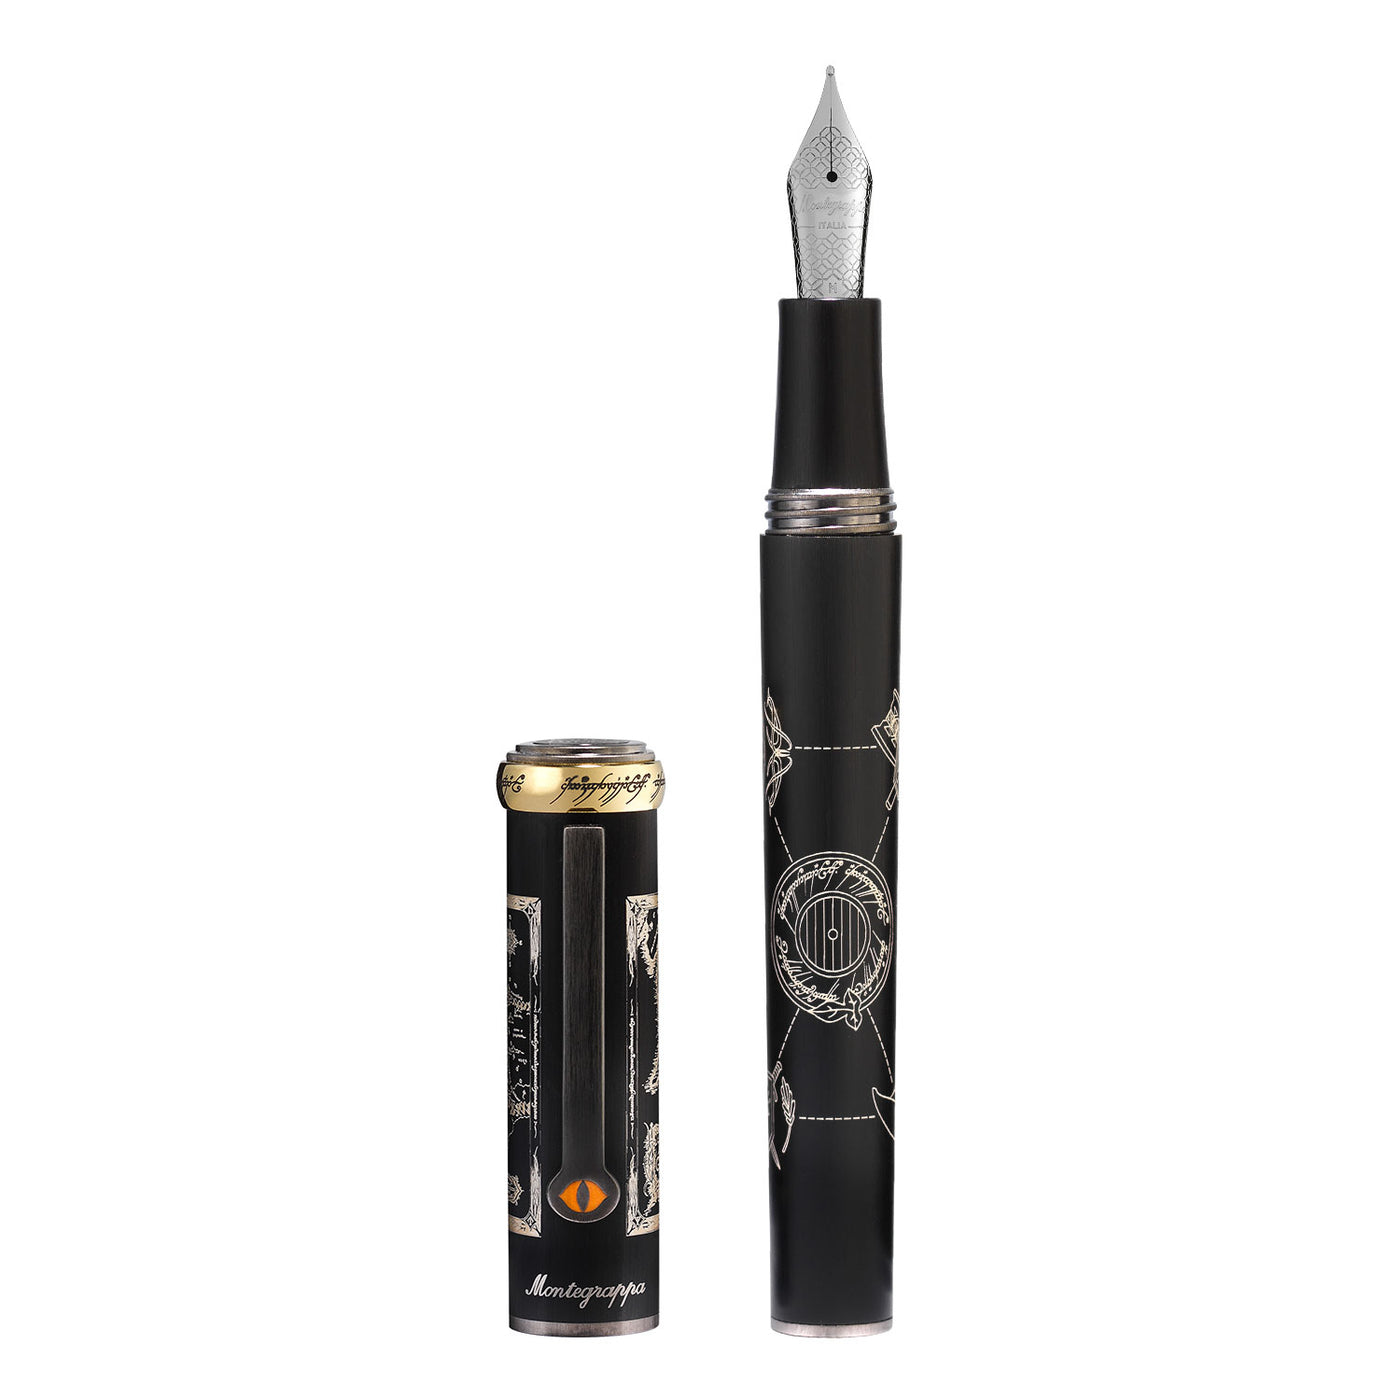 Montegrappa LOTR Eye of Sauron Fountain Pen - Middle Earth (Limited Edition) 4